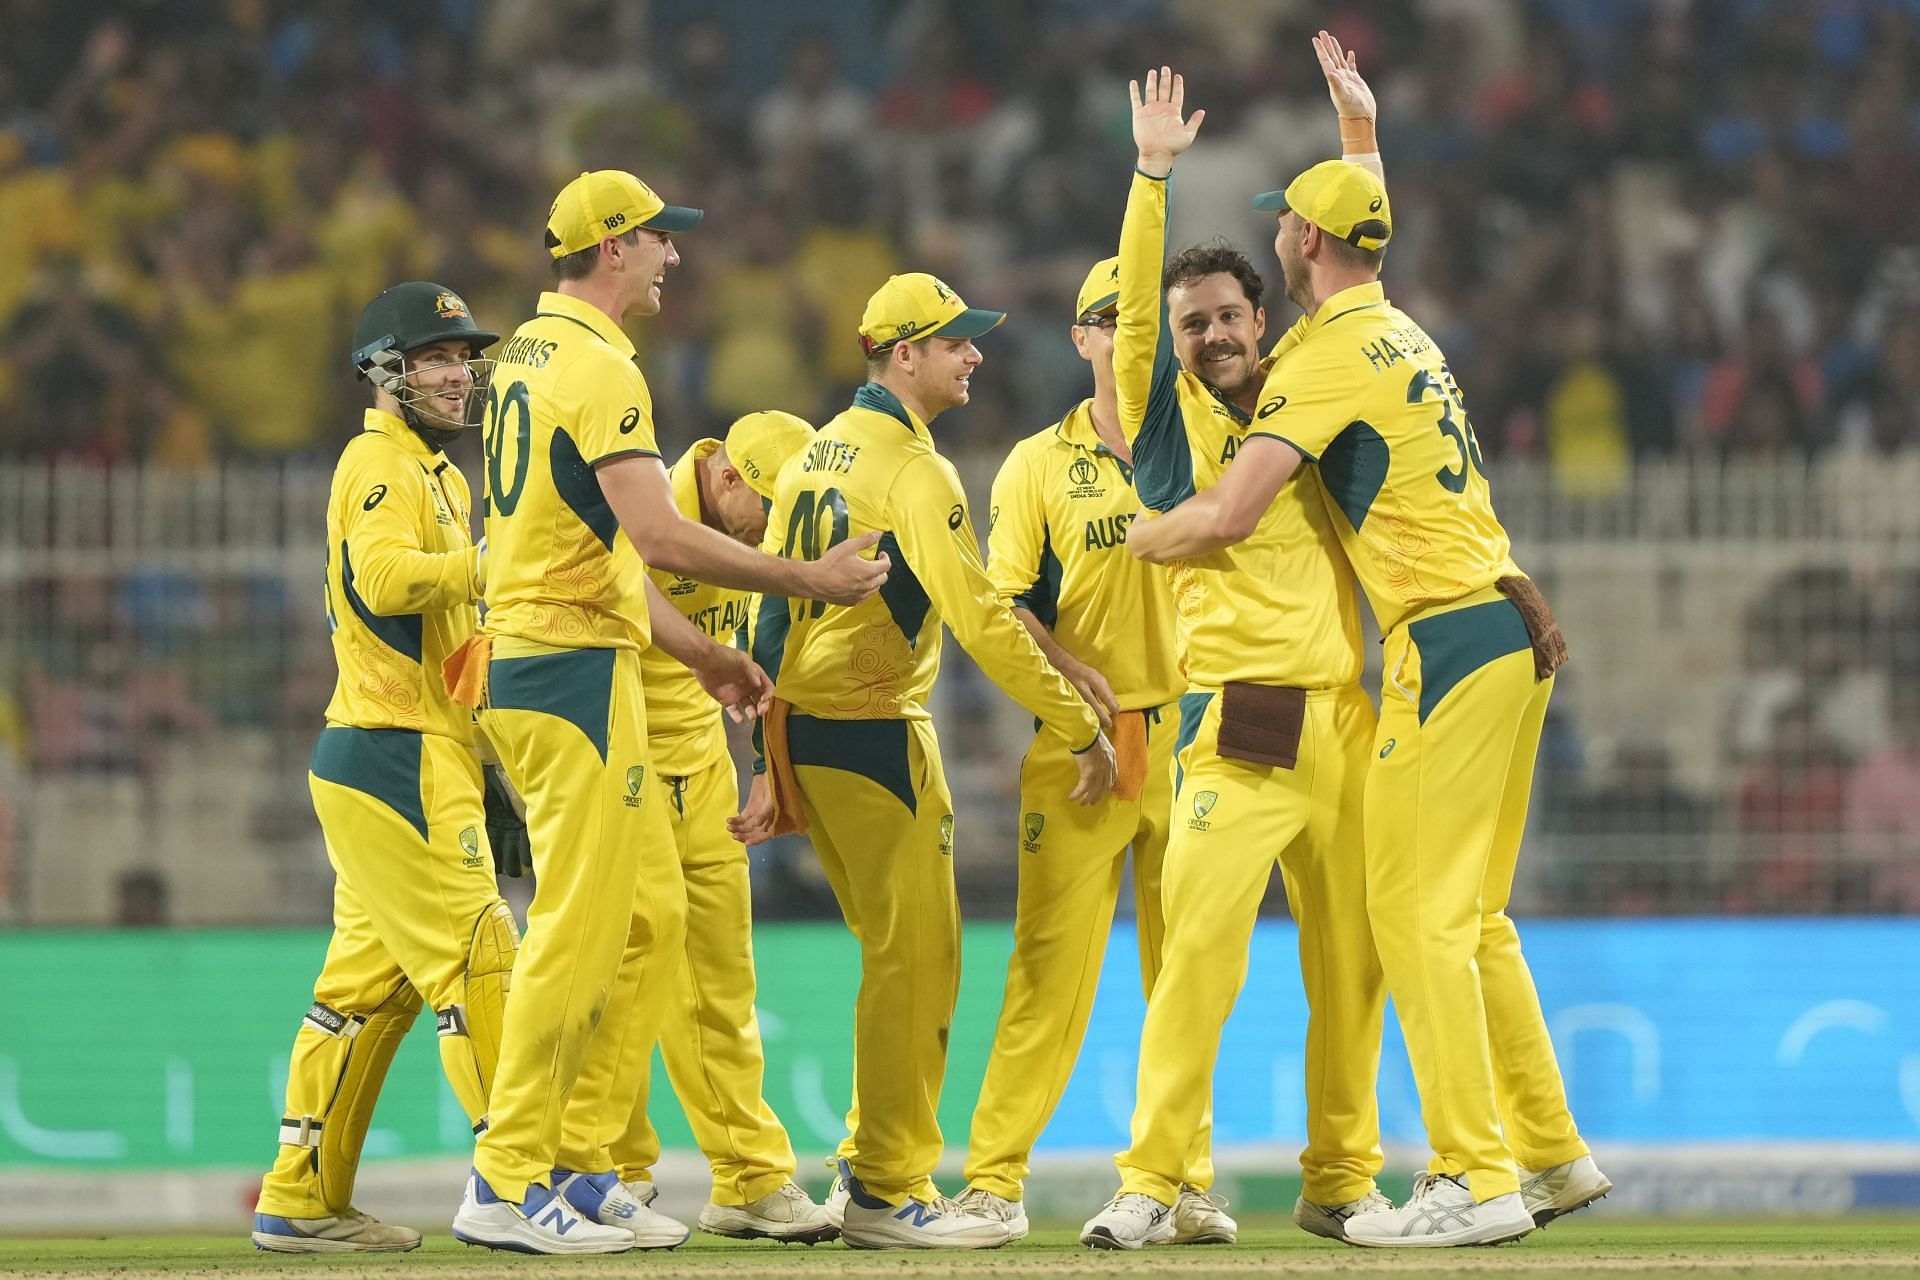 Who said what - top 4 expert reactions to Australia's semi-final win vs South Africa in 2023 World Cup ft. Gautam Gambhir